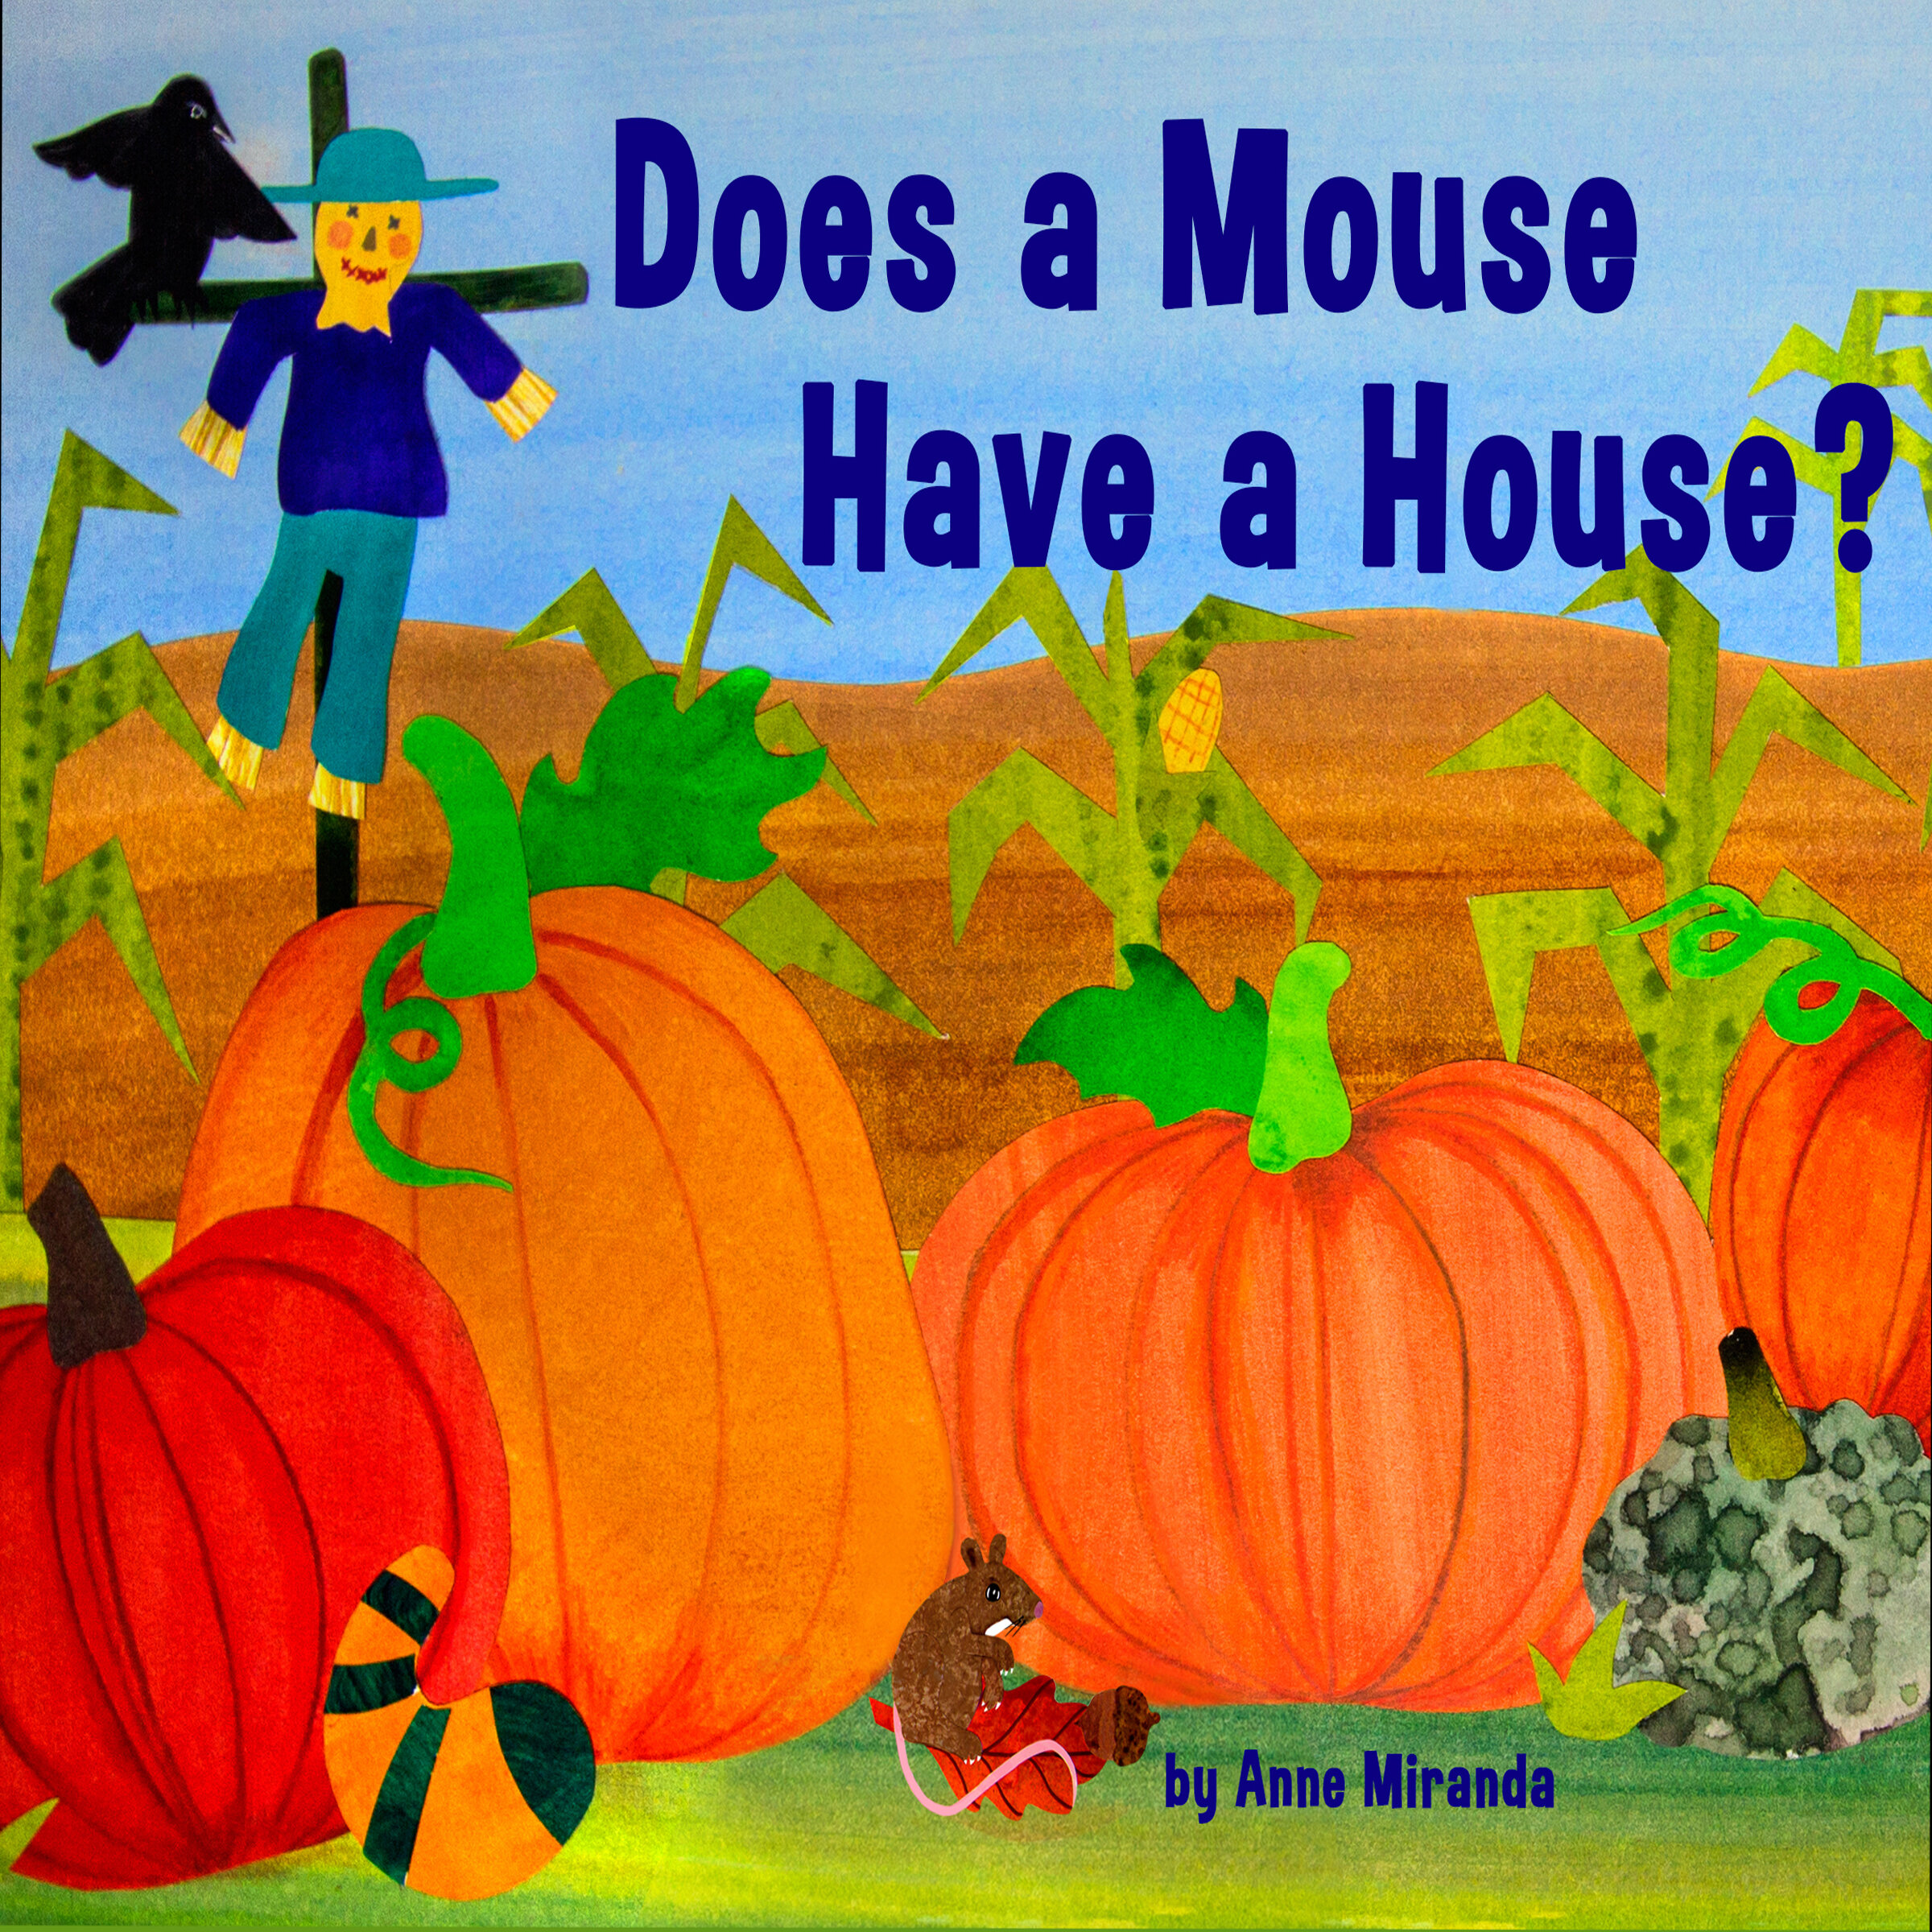 Does a Mouse Have a House self illustrated